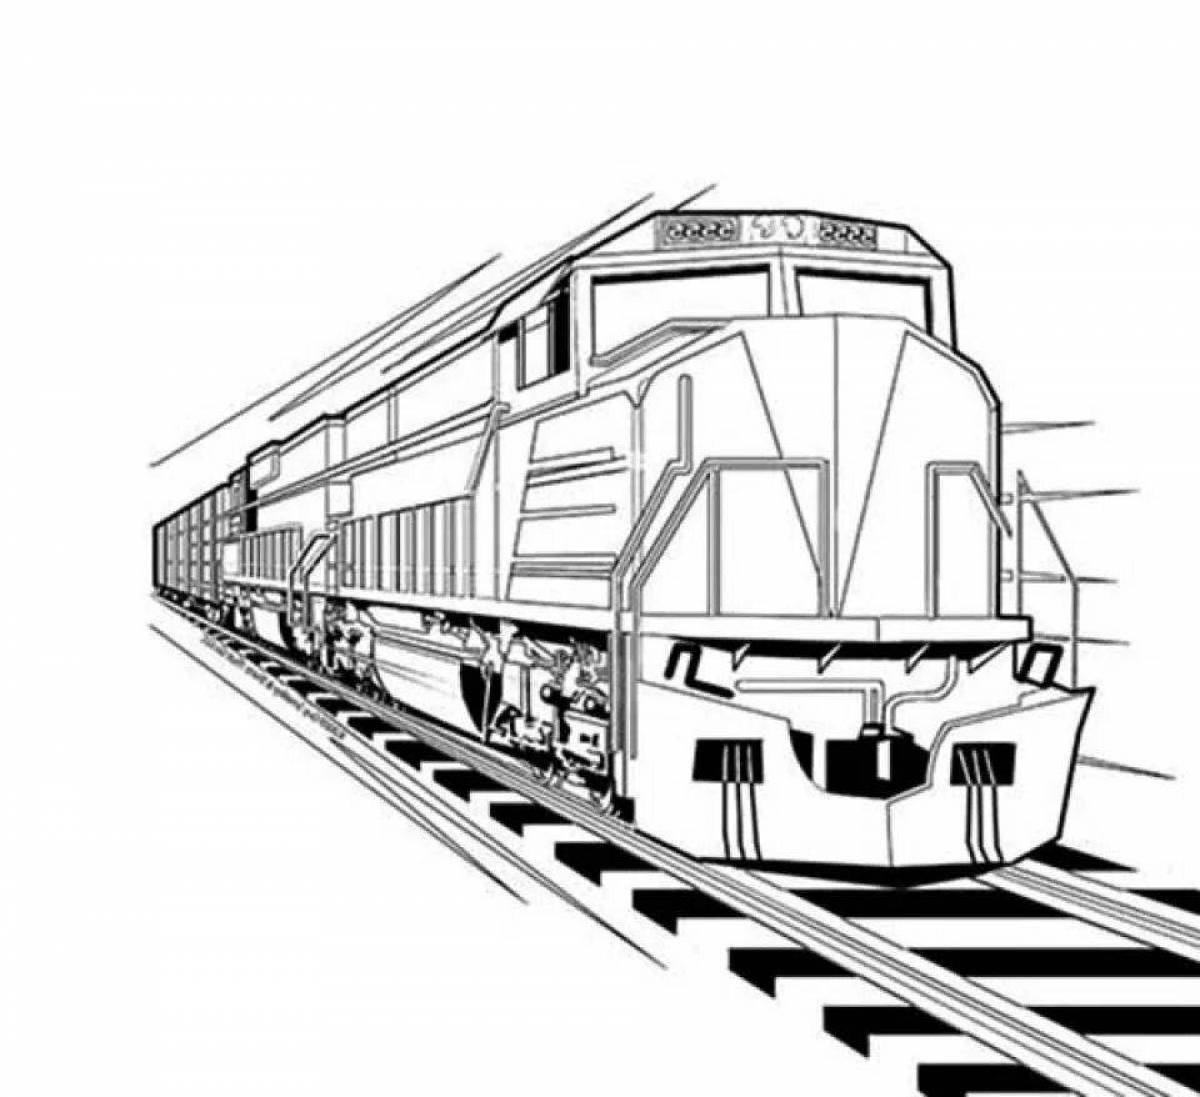 Charming locomotive coloring page